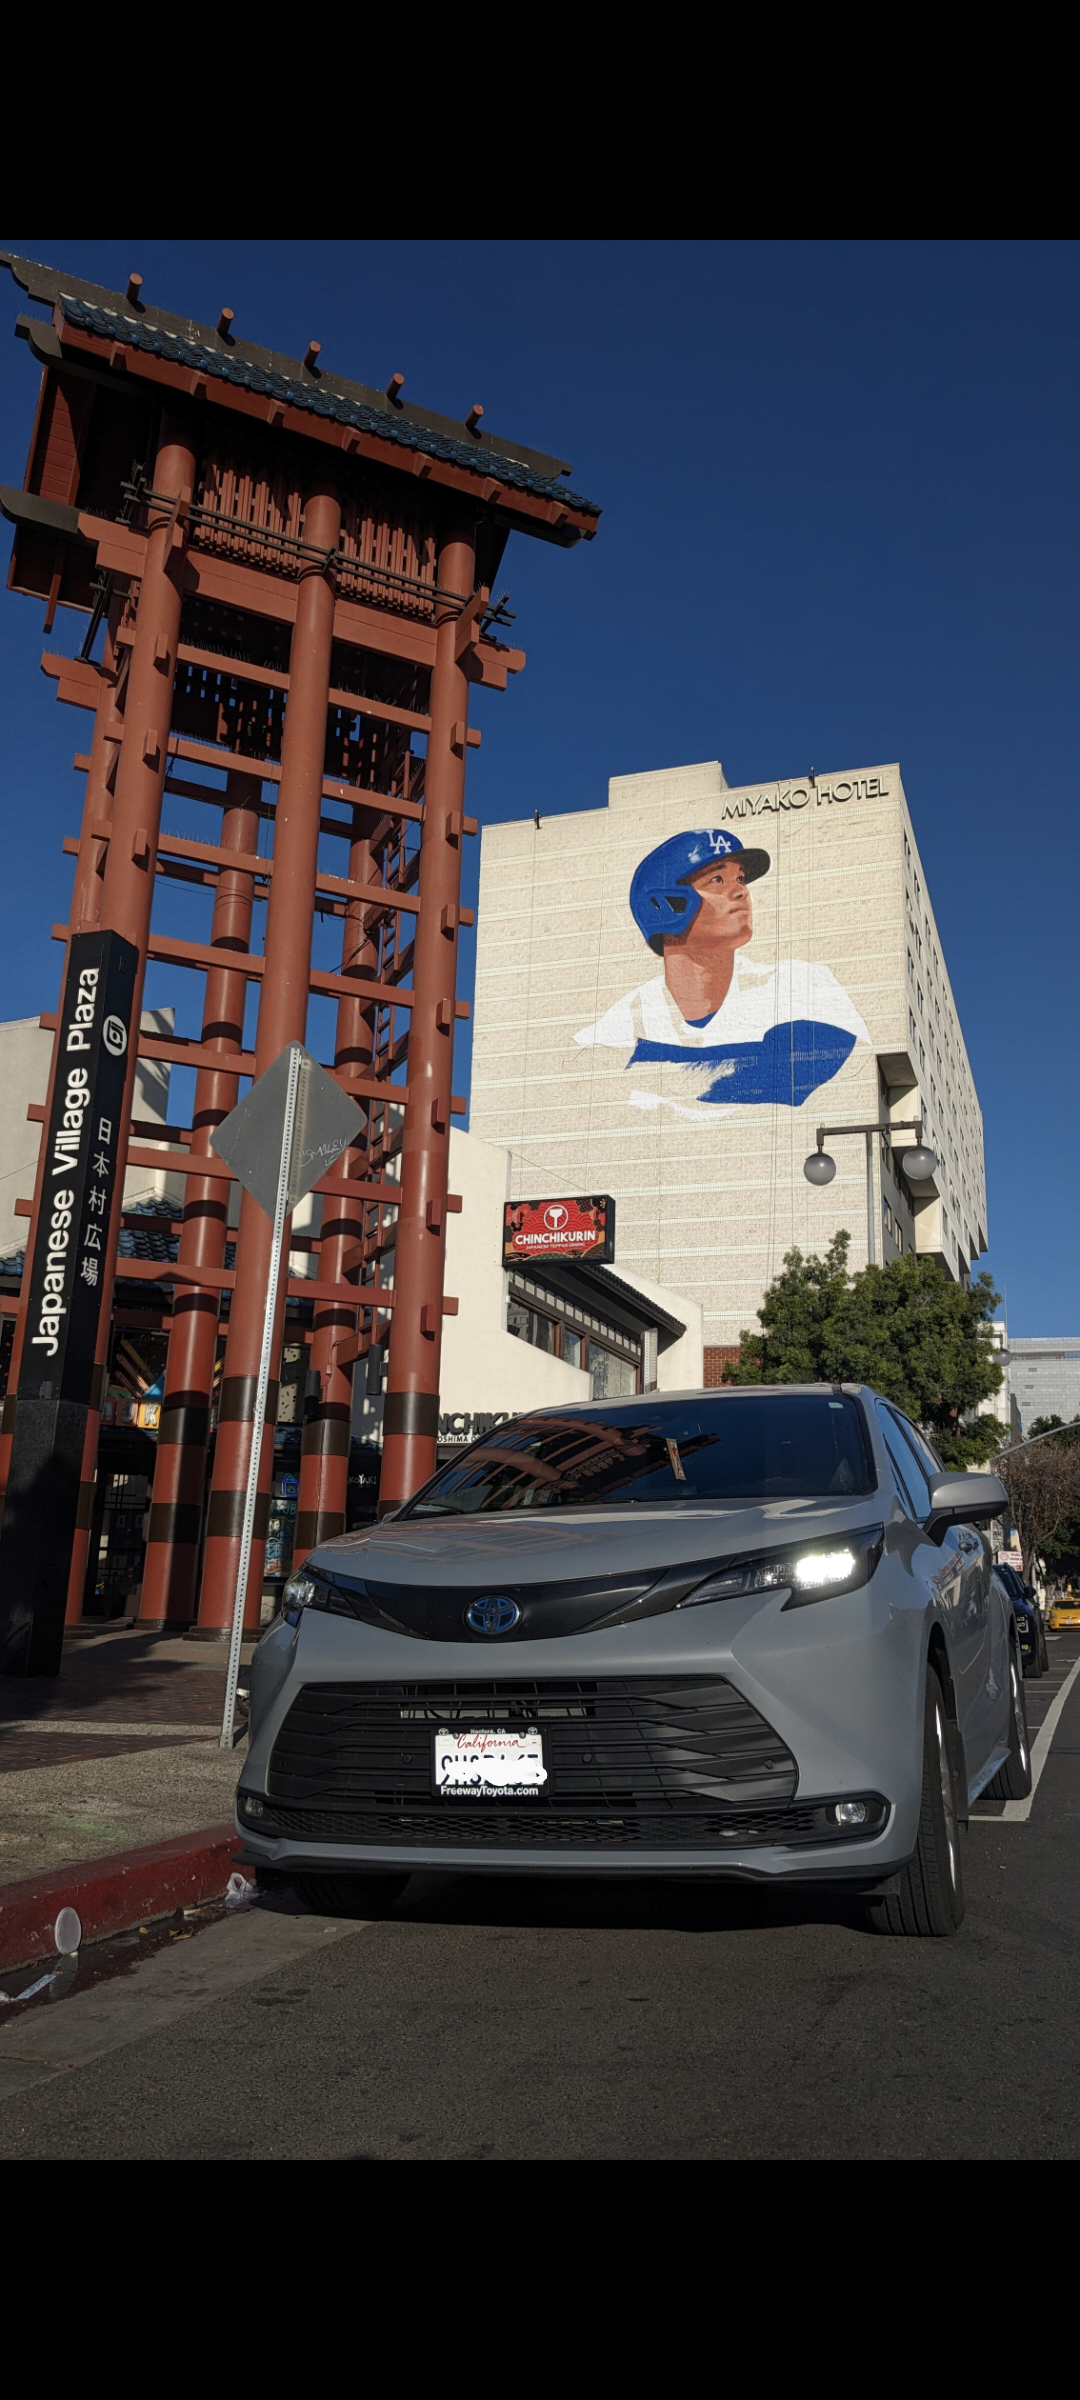 Little Tokyo’s Tribute: Shohei Ohtani Takes Center Stage on Miyako Hotel Mural